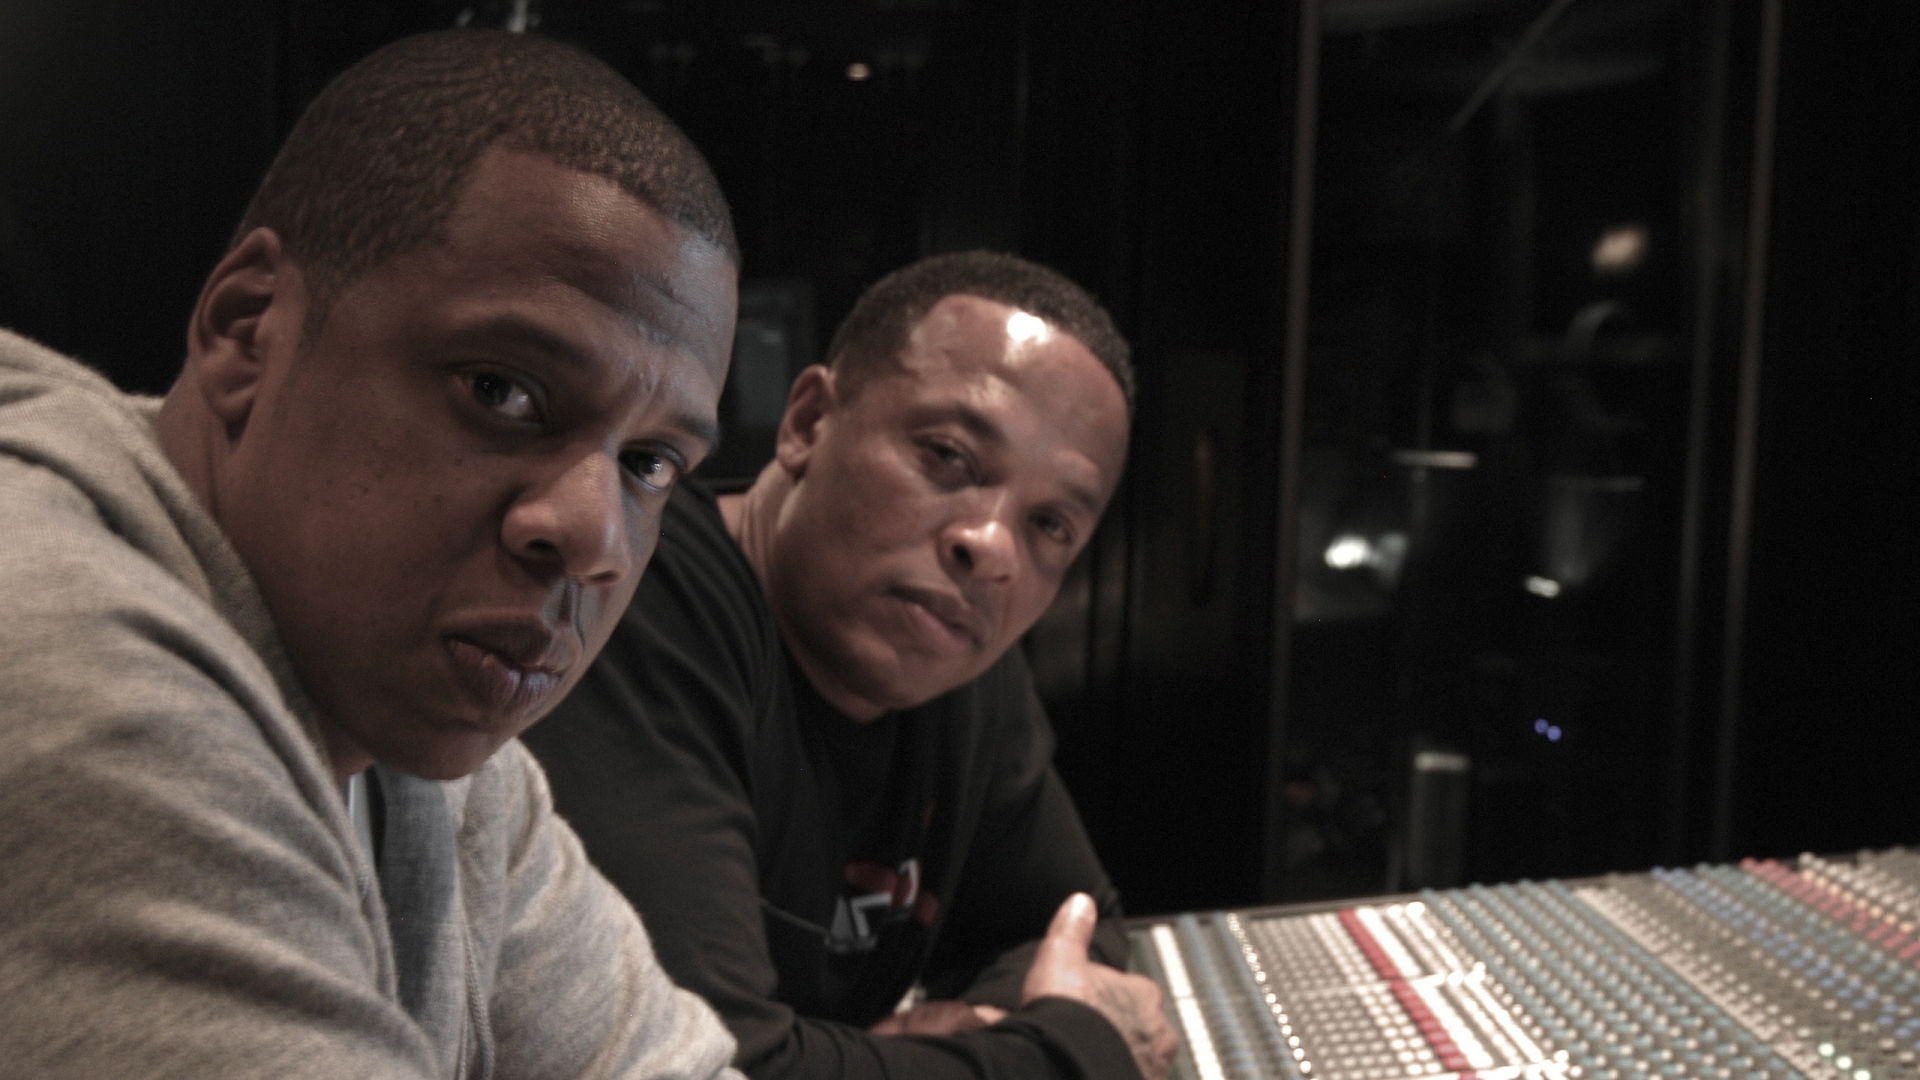 Jaz-Z and Dr Dre in Studio for 1920 x 1080 HDTV 1080p resolution